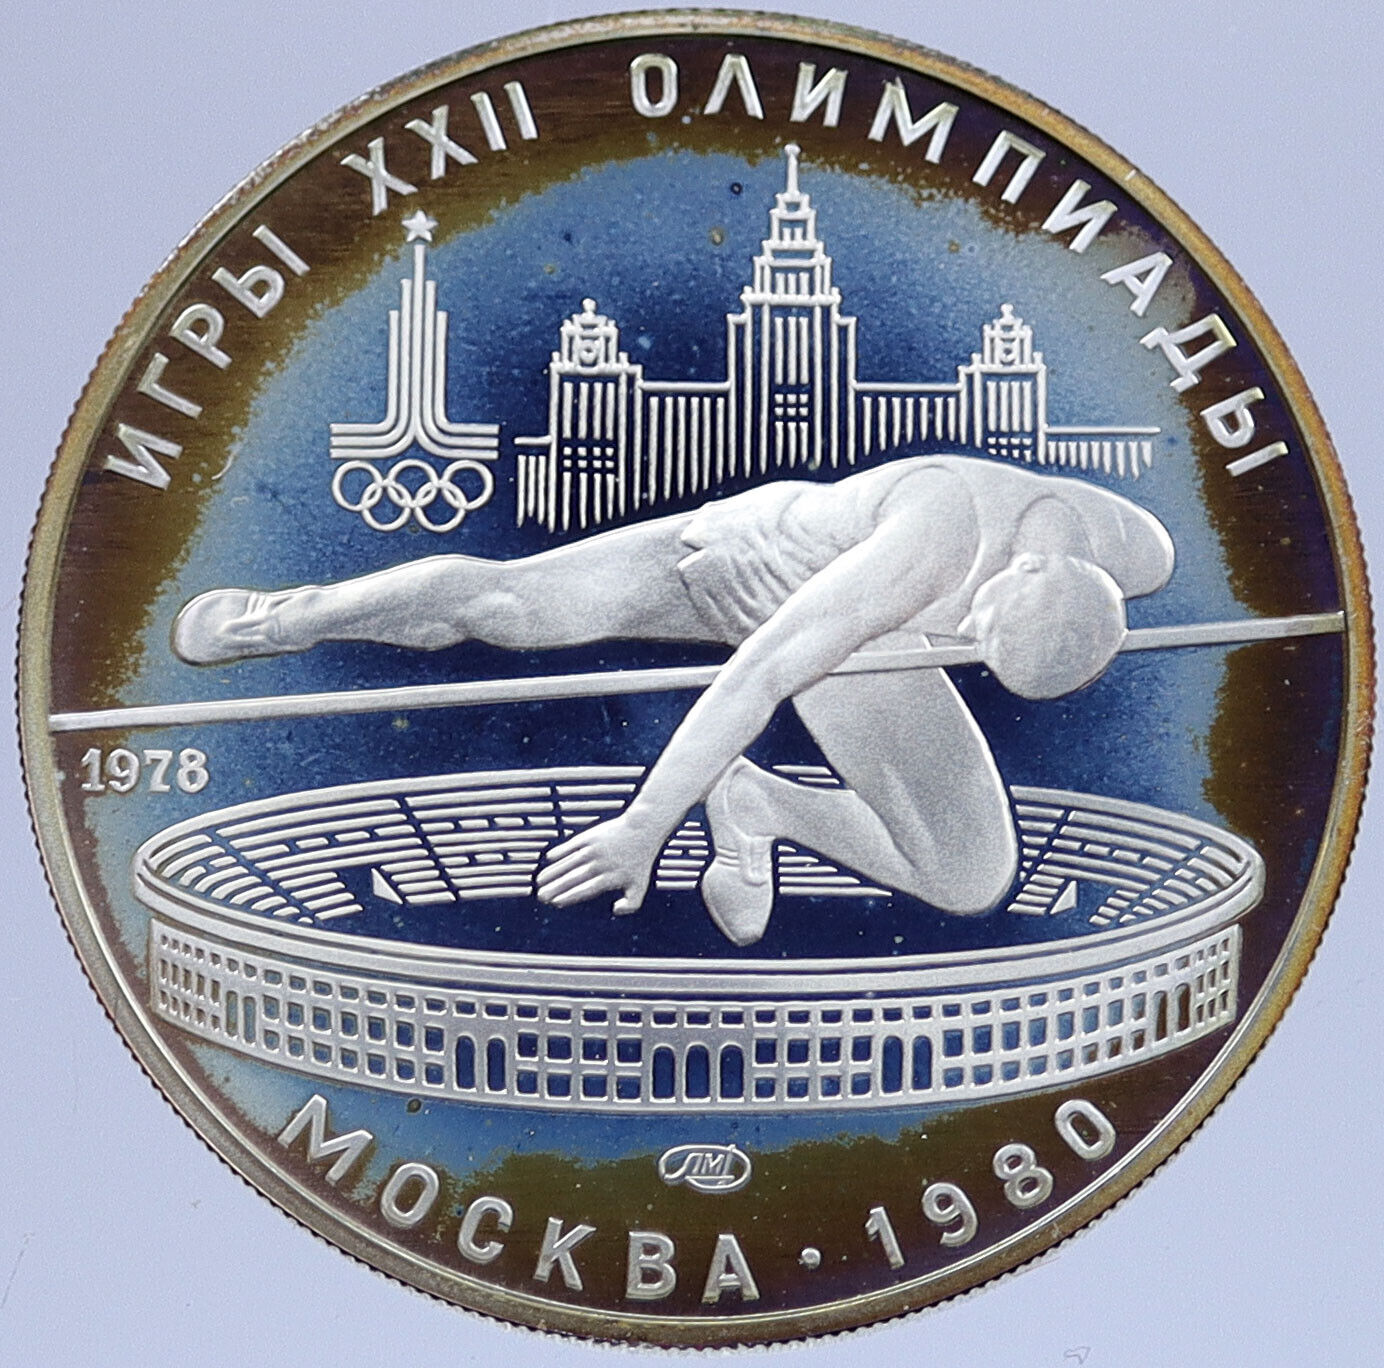 1978 MOSCOW 1980 Russia Olympics HIGH JUMP Old Proof Silver 5 Ruble Coin i118945